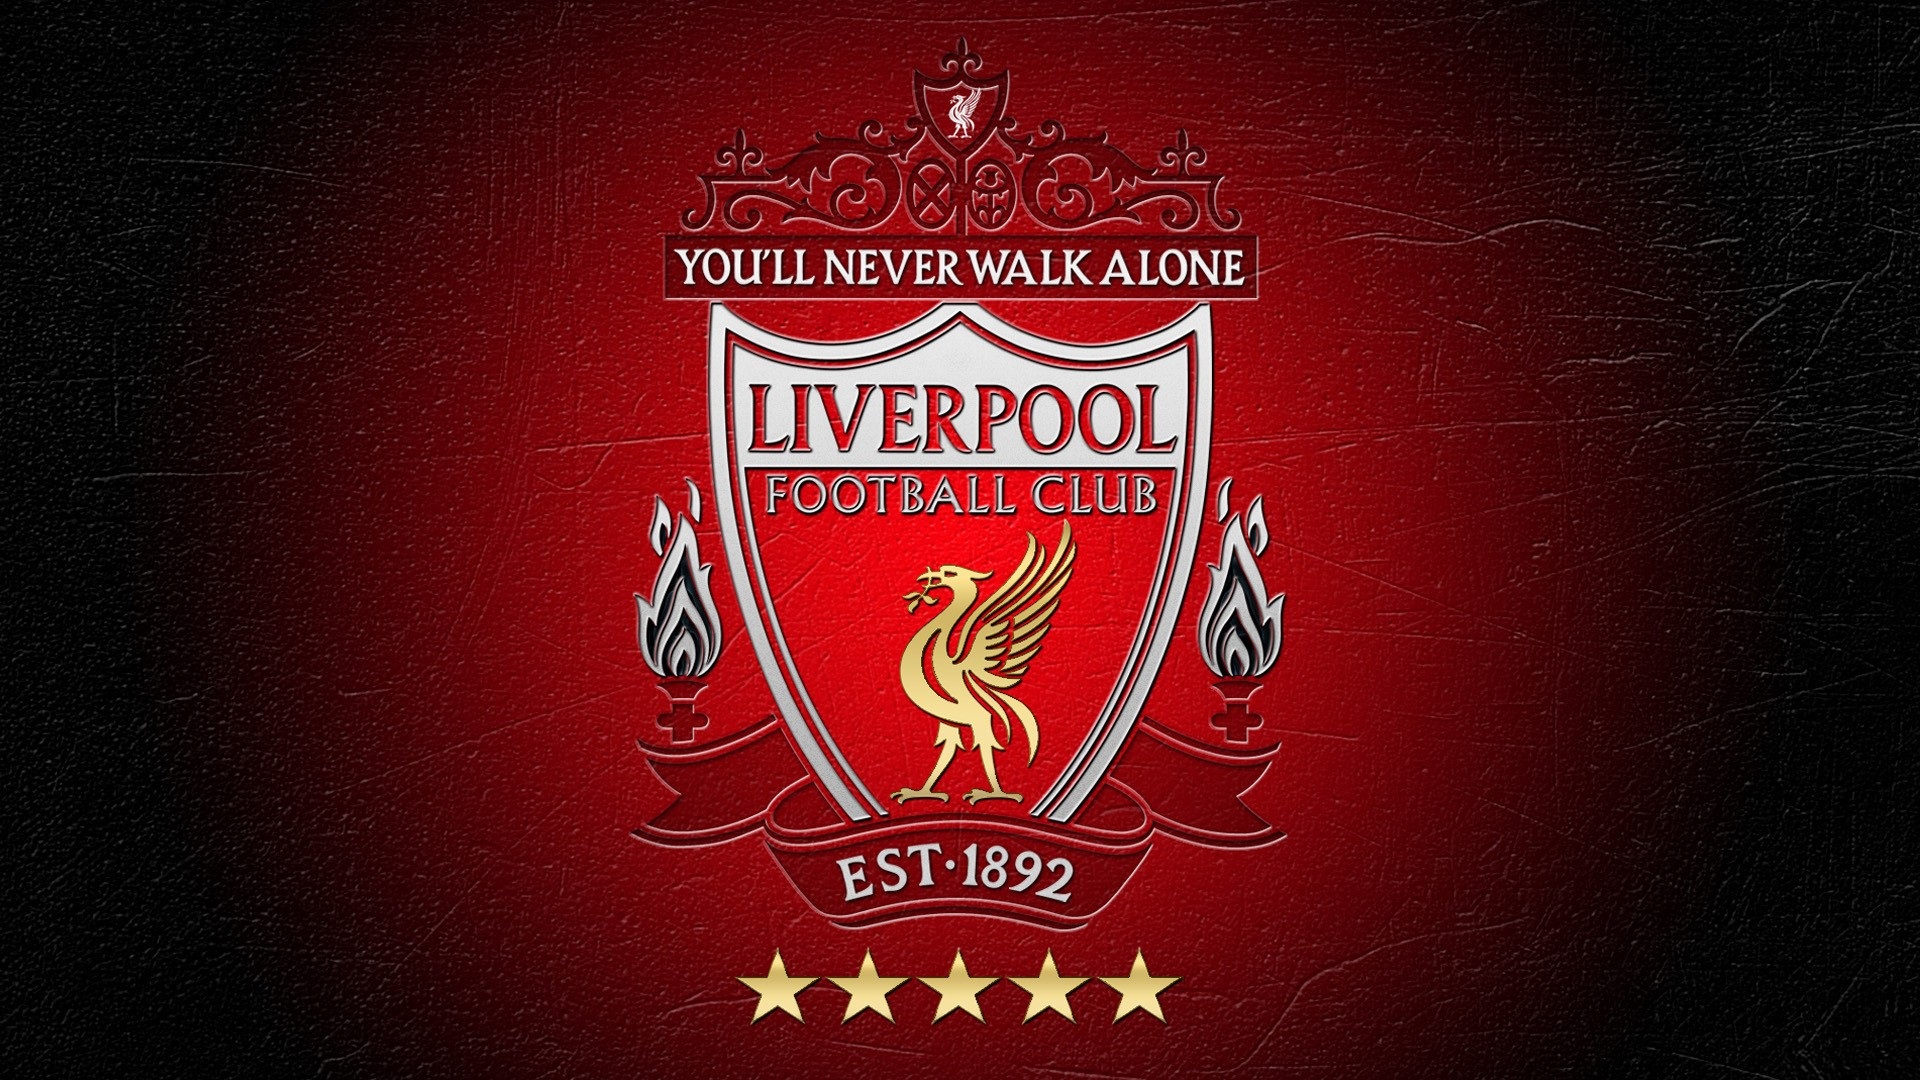 Liverpool Desktop Wallpapers With Resolution 1920X1080 pixel. You can make this wallpaper for your Mac or Windows Desktop Background, iPhone, Android or Tablet and another Smartphone device for free